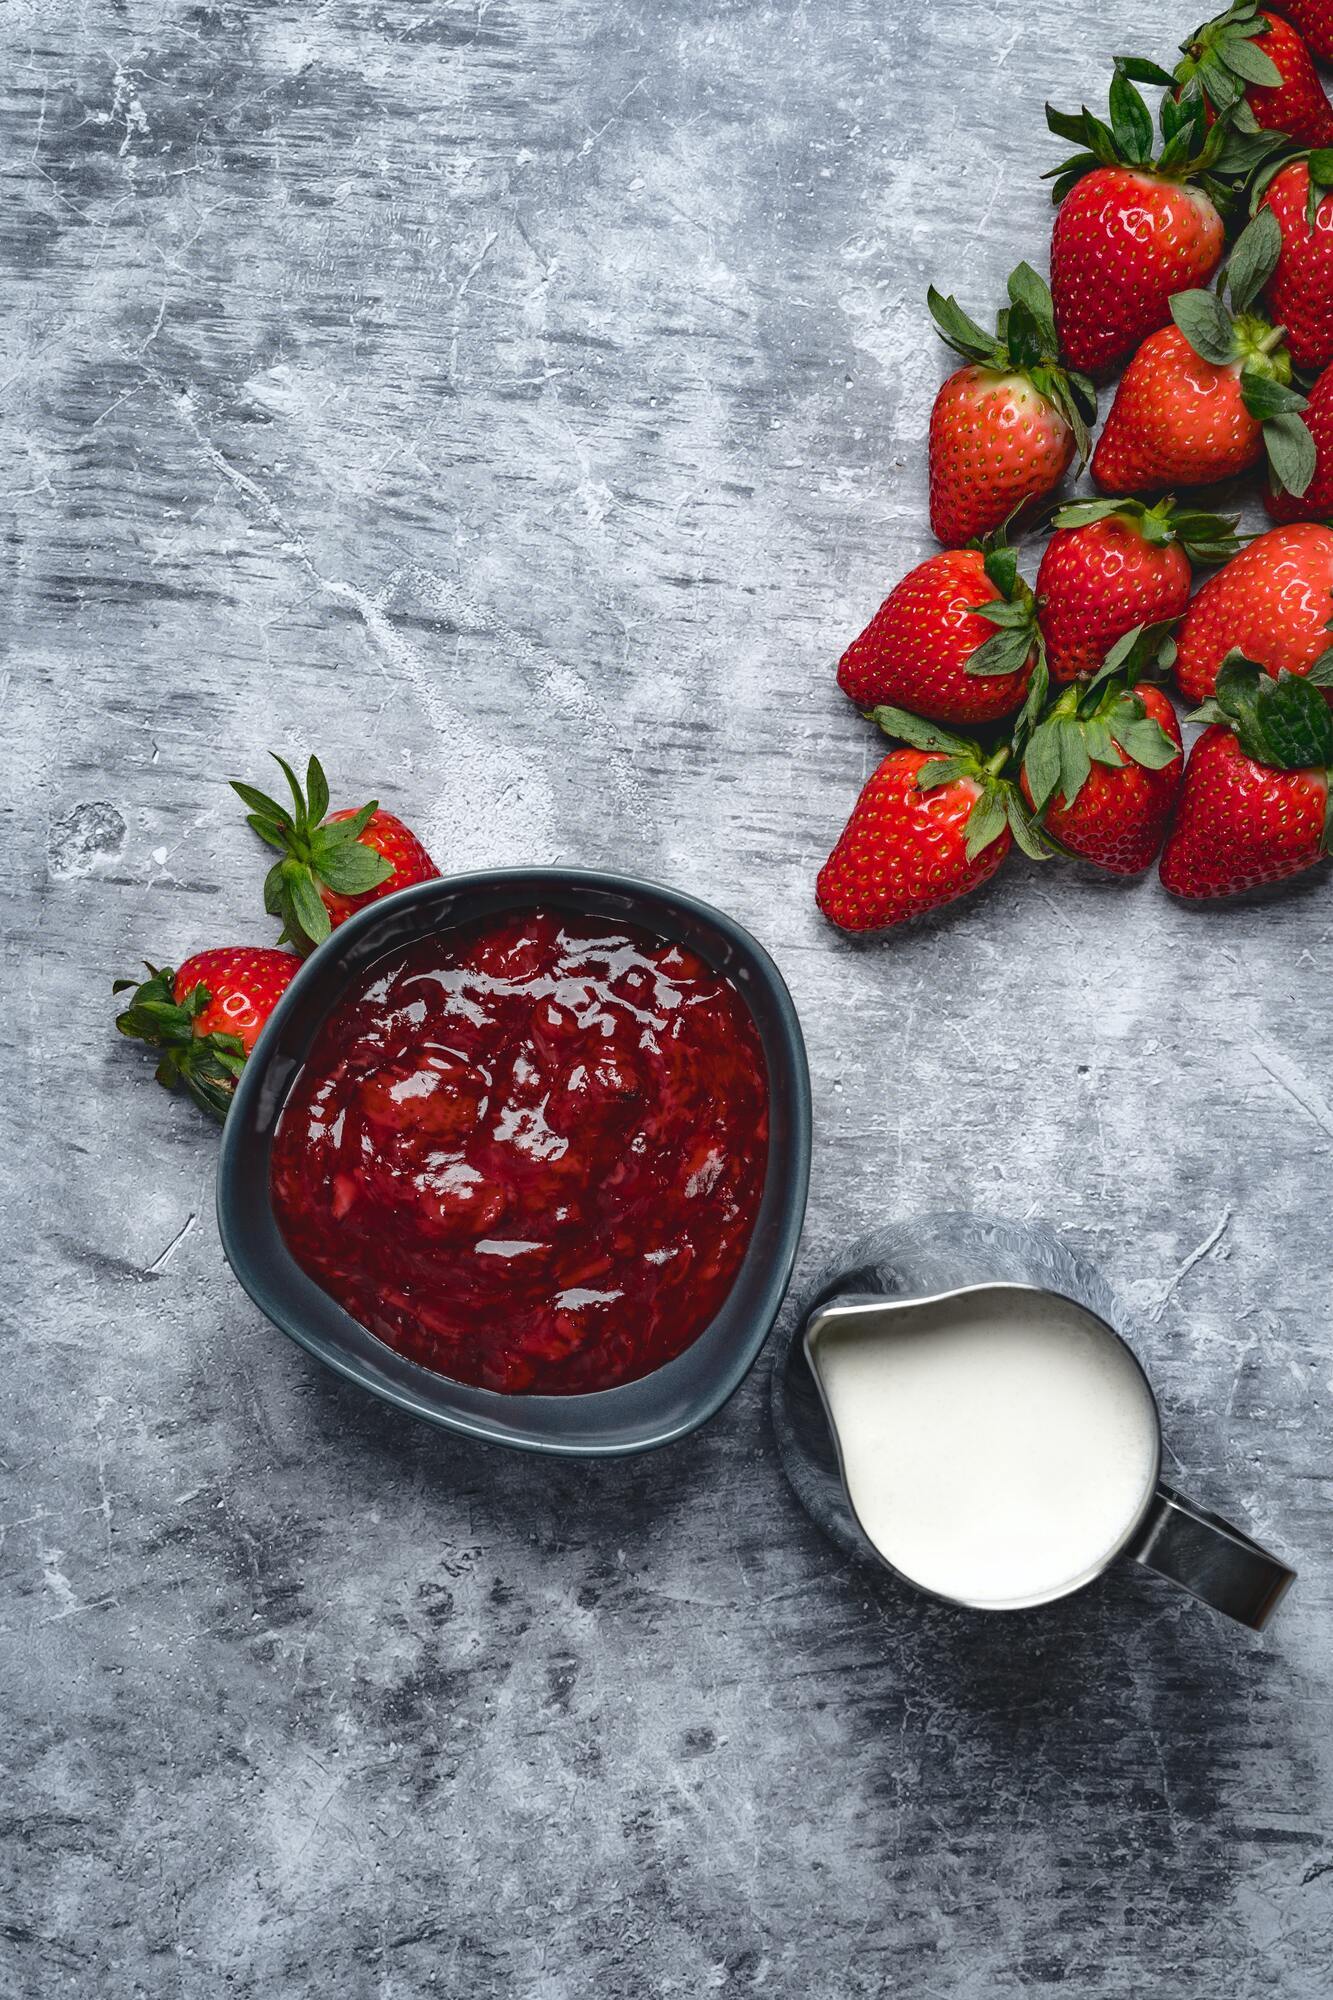 How long do you need to cook strawberry preserves